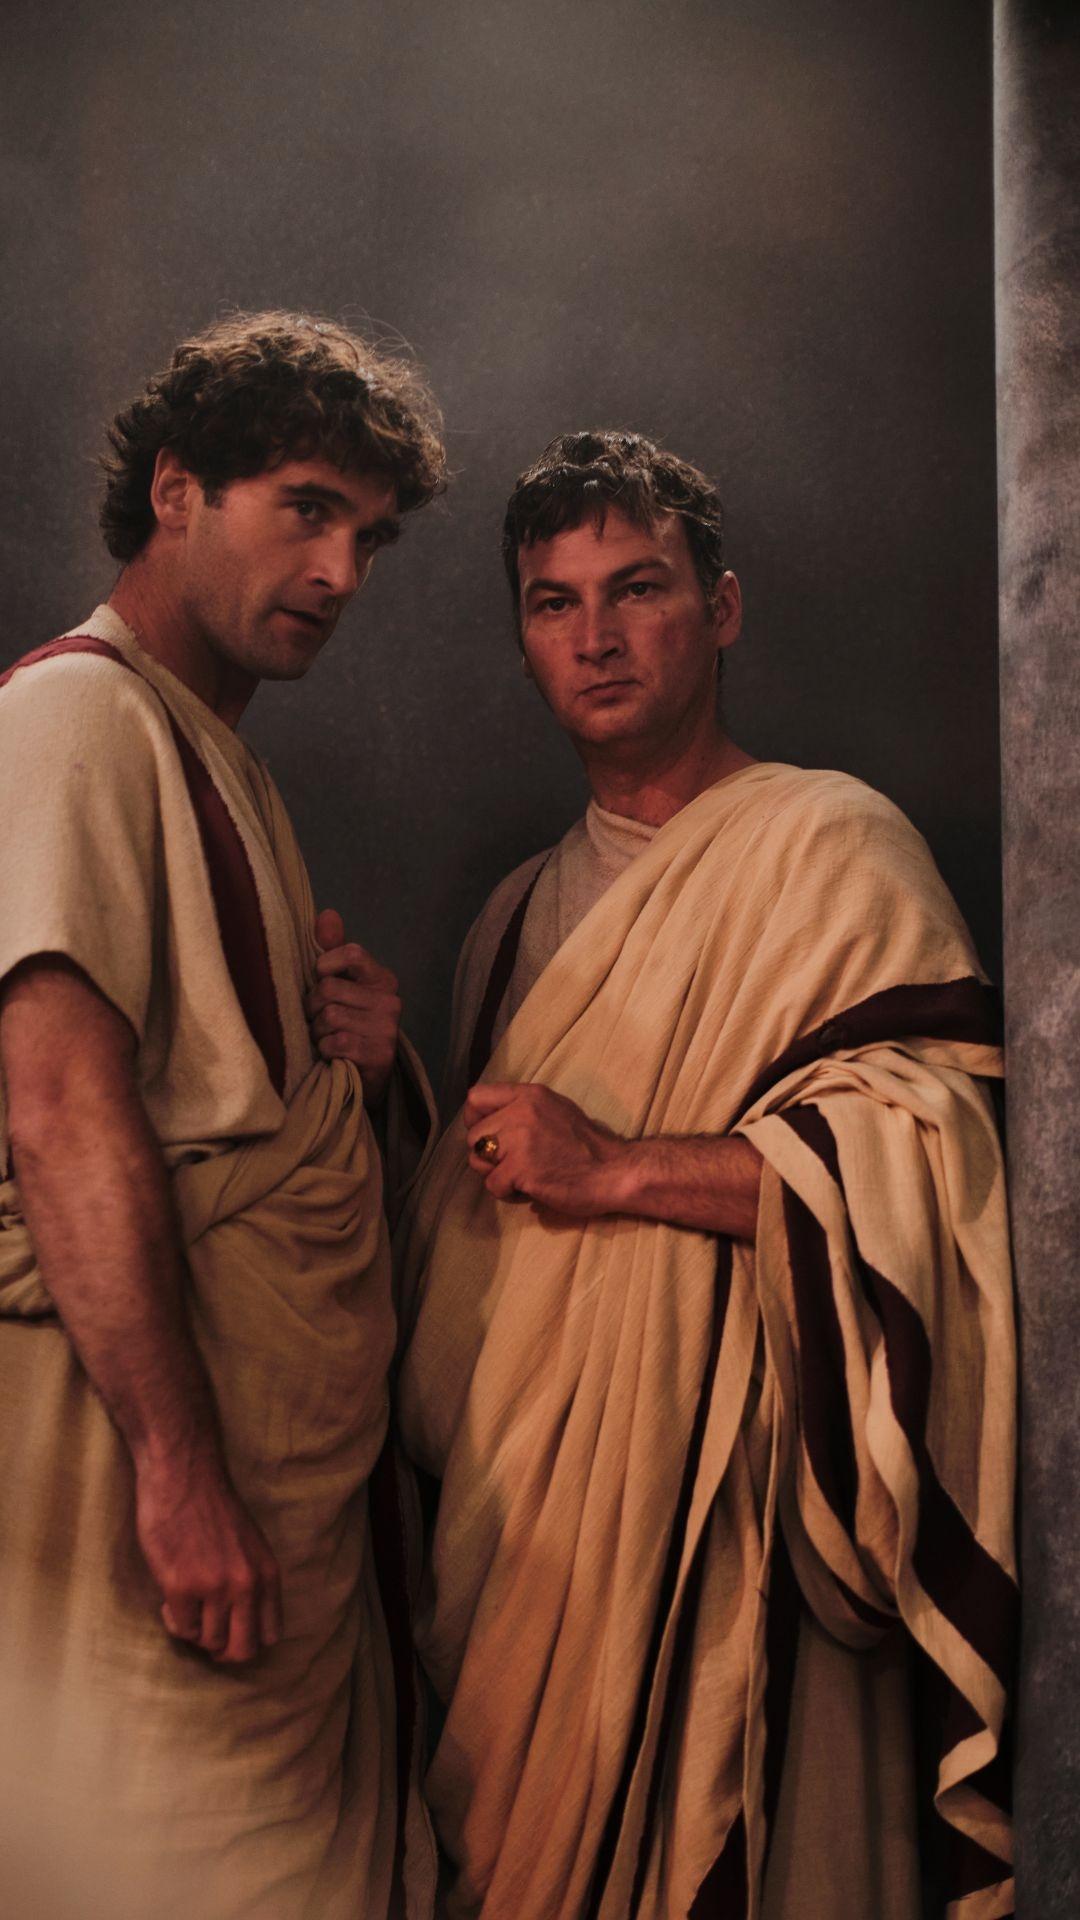 Brutus (played by David Buttle) and Cassius (played by Johnny Palmiero) 